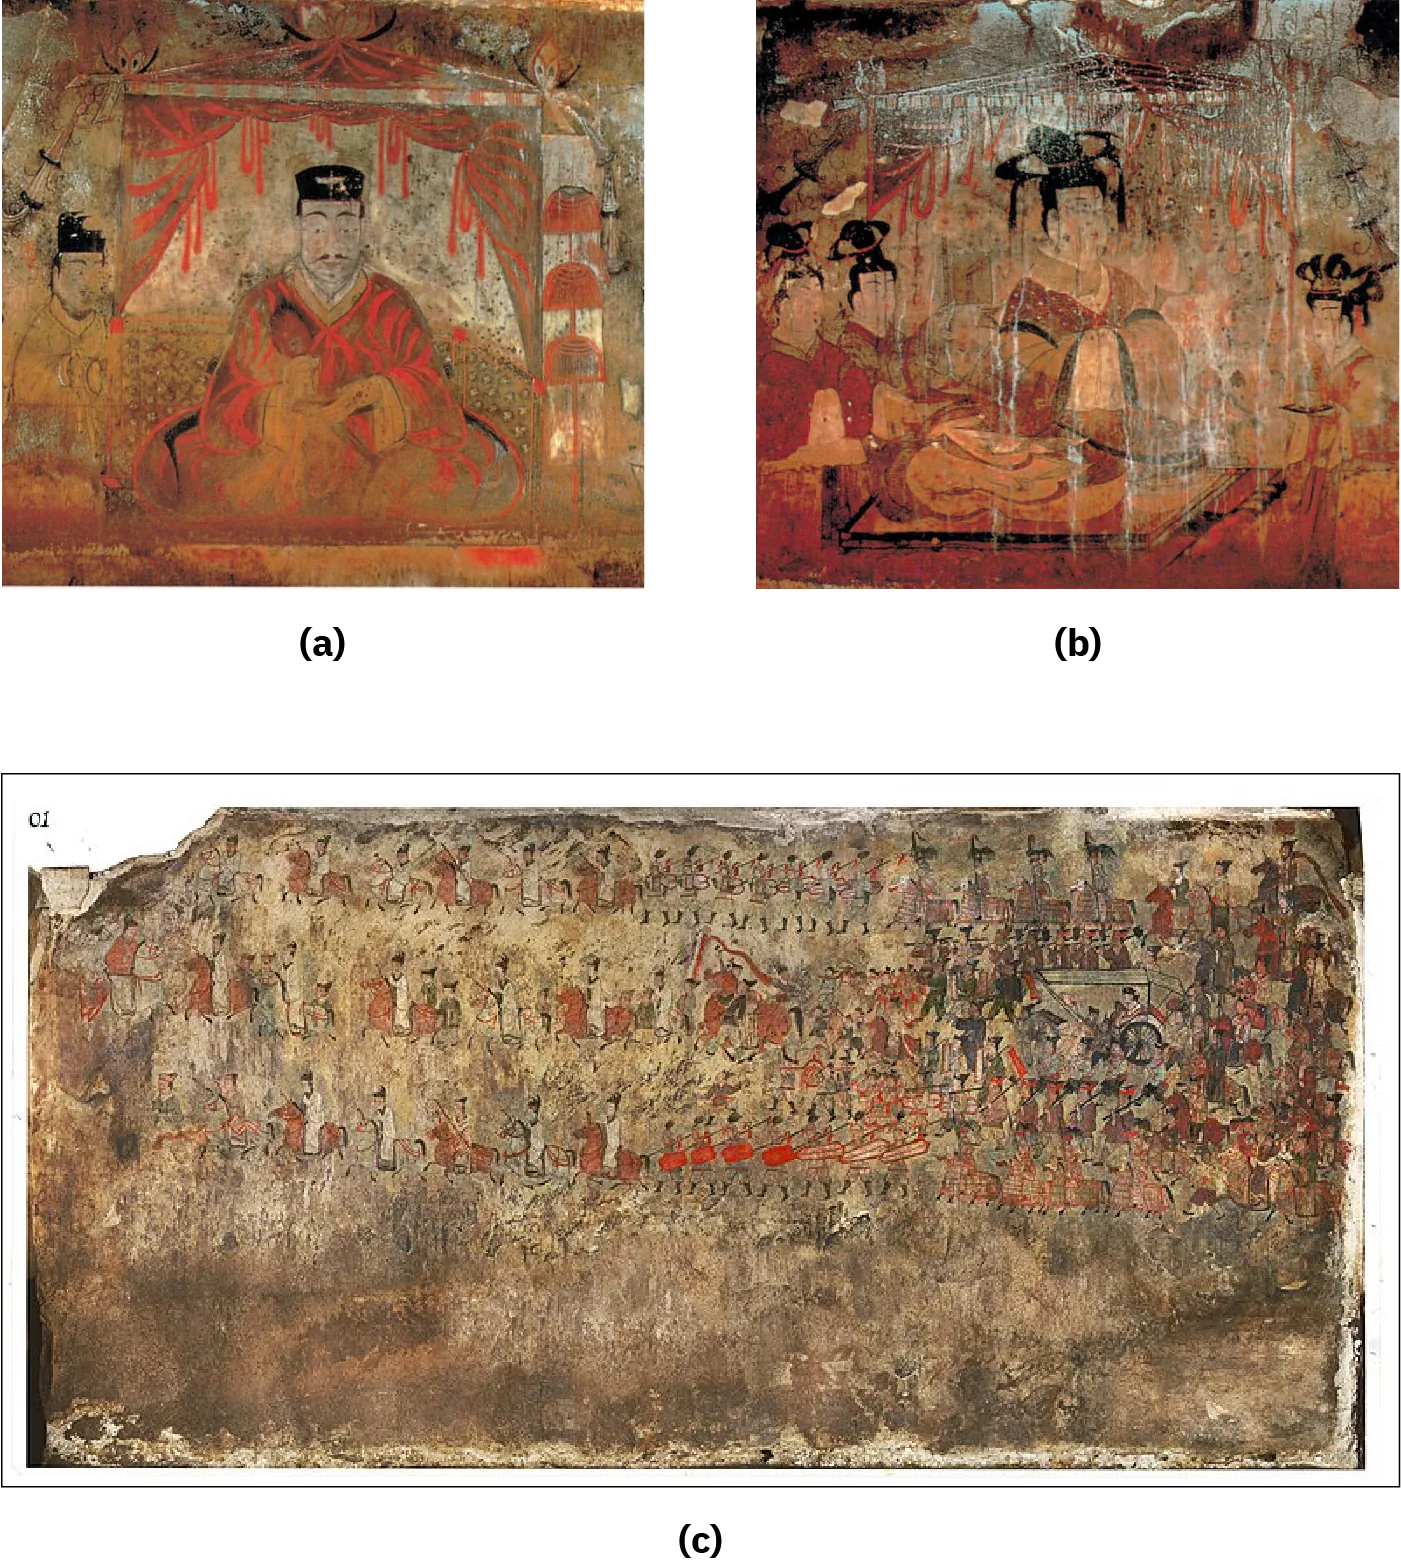 Three images of faded paintings are shown on gray, brown, and black stone walls. (a) An image shows a man sitting cross-legged in long red robes with neon orange highlights. He wears a flat black cap, has small eyes, dark eyebrows, and a small thin moustache. He is looking down at his hands, which are raised in front of his chest. He holds a flat object in his left hand and an oval shaped object is his right hand. He is sitting in a square tent with a triangle shape on top with the curtains open in the front and hanging over his head. To the left a faded image of a figure is shown with a black hat, small eyes, thin moustache and wearing yellowing robes. To the right of the tent three half circles in orange with stripes are stacked on a pole. Faded images surround the tent in orange, black and white colors. (b) A very faded image of a woman sitting on a square, flat platform facing to the right is shown. She is dressed in thick red, orange, white, and black robes and her hands are hidden in the opposite sleeves of her robe at chest level. She shows a small red mouth, but most of her facial details are faded. Her hair is black and stacked on her head in a tall bun with a halo of black with tails surrounding it. She sits under a faded square tent with the sides draped at the top in white, black, and neon orange colors. Faded white wavy lines run down her image from the top of the tent to the floor. To the left, two figures are seen in long red robes with stone colored trim. Their black hair is piled on their heads in tall buns with halos surrounding the bun. Red details are seen in the hair. Their facial features are faded, but small, red lips are shown. A figure to the right is shown in faded long red and orange robes holding a black plate and faded saucer in her hands at chest level. Her red mouth and black eyebrows show and her black hair is piled on top of her head in a series of half-moon projections with an ornate headband in the middle. Faded images surround the tent in black colors and the bottom of the image is painted orange and red. (c) A very faded images shows on a rectangular stone, with a broken top left corner and worn and faded edges in black, brown, and white colors. The bottom third of the image is varying shades of brown stone with no images. The top two thirds of the image show three rows of figures and animals walking to the left. The top row shows six figures in long white robes riding brown horses. Next, seven figures in black boots walk holding long black thin objects over their shoulders. Four figures on horses clad in decorative blankets sit with large black hats and hold long black poles. The second row shows a large figure in an orange robe siting on a red reined horse facing to the right. A figure on a brown horse in a white robe is next, facing to the left. Behind the horse, three figures of varying sizes stand in robes of white and green. A similar image of this four group of people follows two more times and then a figure in green robes holding a long red stick with a long red, thin flag is shown walking. A large brown horse follows with a figure in brown walking next to it. A blurry image follows which shows a group in brown walking as well as a triangle shaped chariot of sorts. The last row shows very faded riders in long robes of white on brown horses. Following is a group with black boots, red shields and long black poles. Horses clad in blankets show next with riders in matching outfits. At the right a large mass of figures stands behind the three rows sitting on horses. Details are faded but brown horses are seen and figures clad in long dark robes.